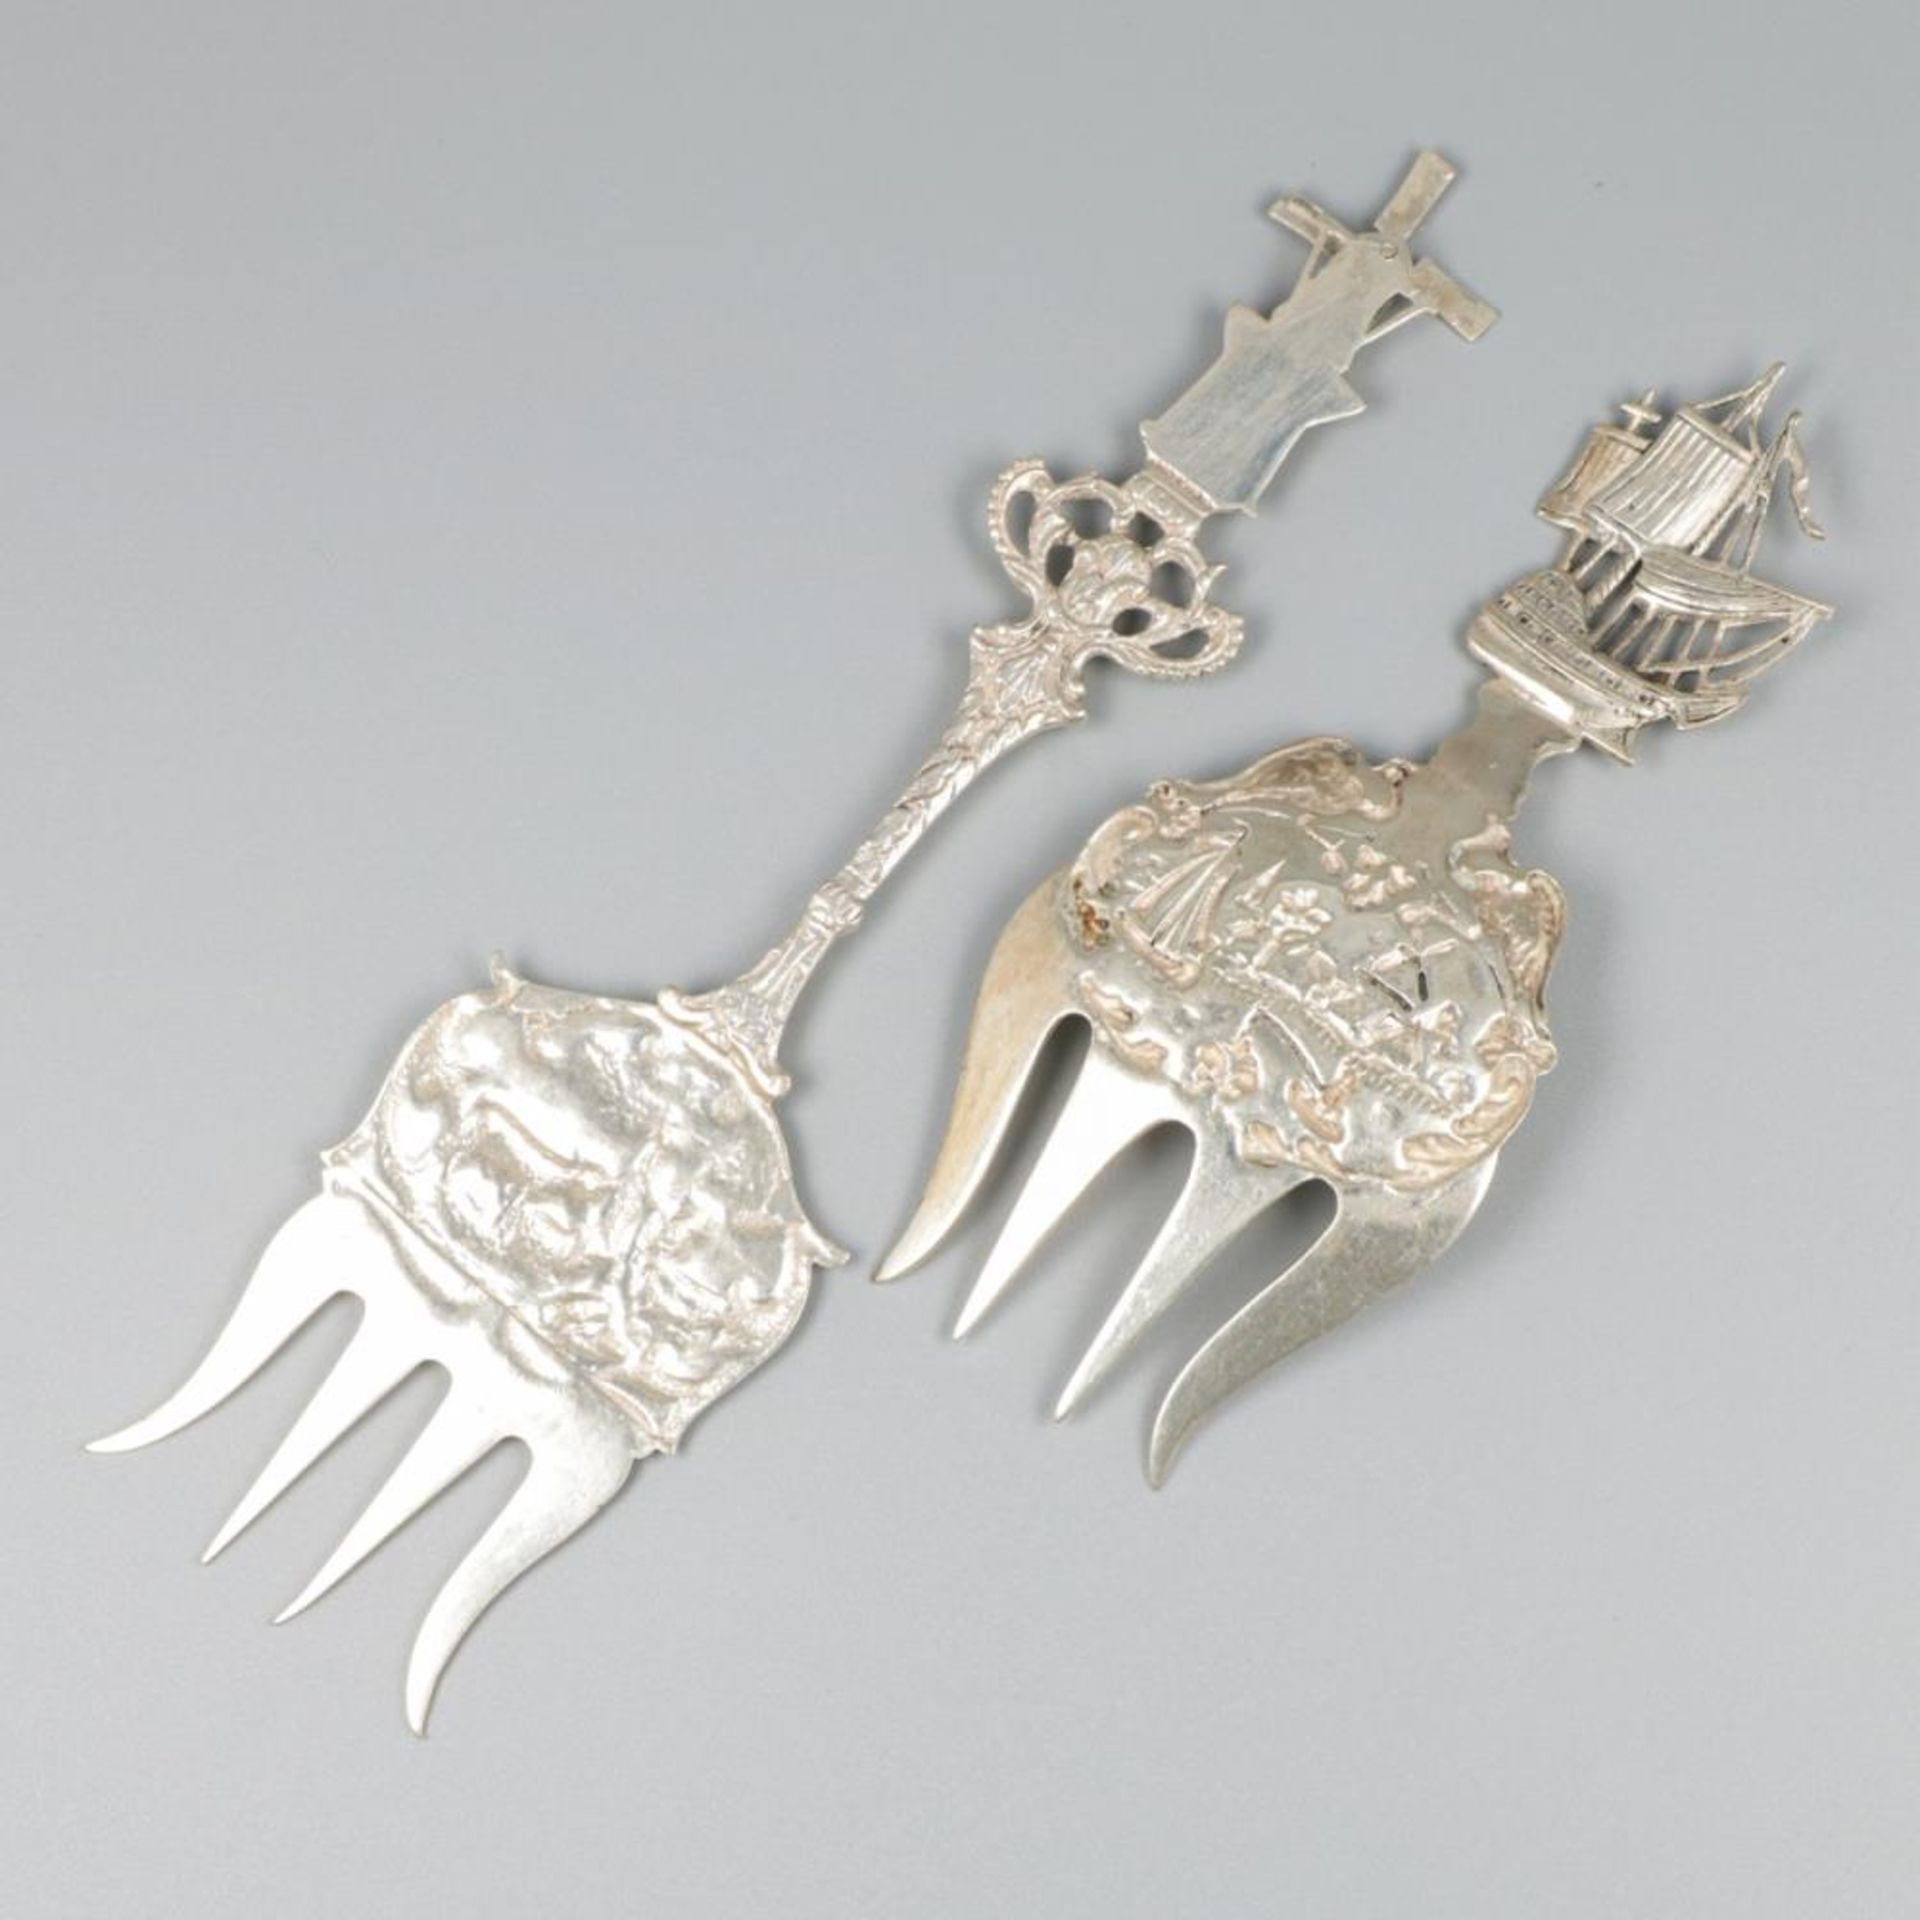 2-piece lot silver bread forks. - Image 2 of 7